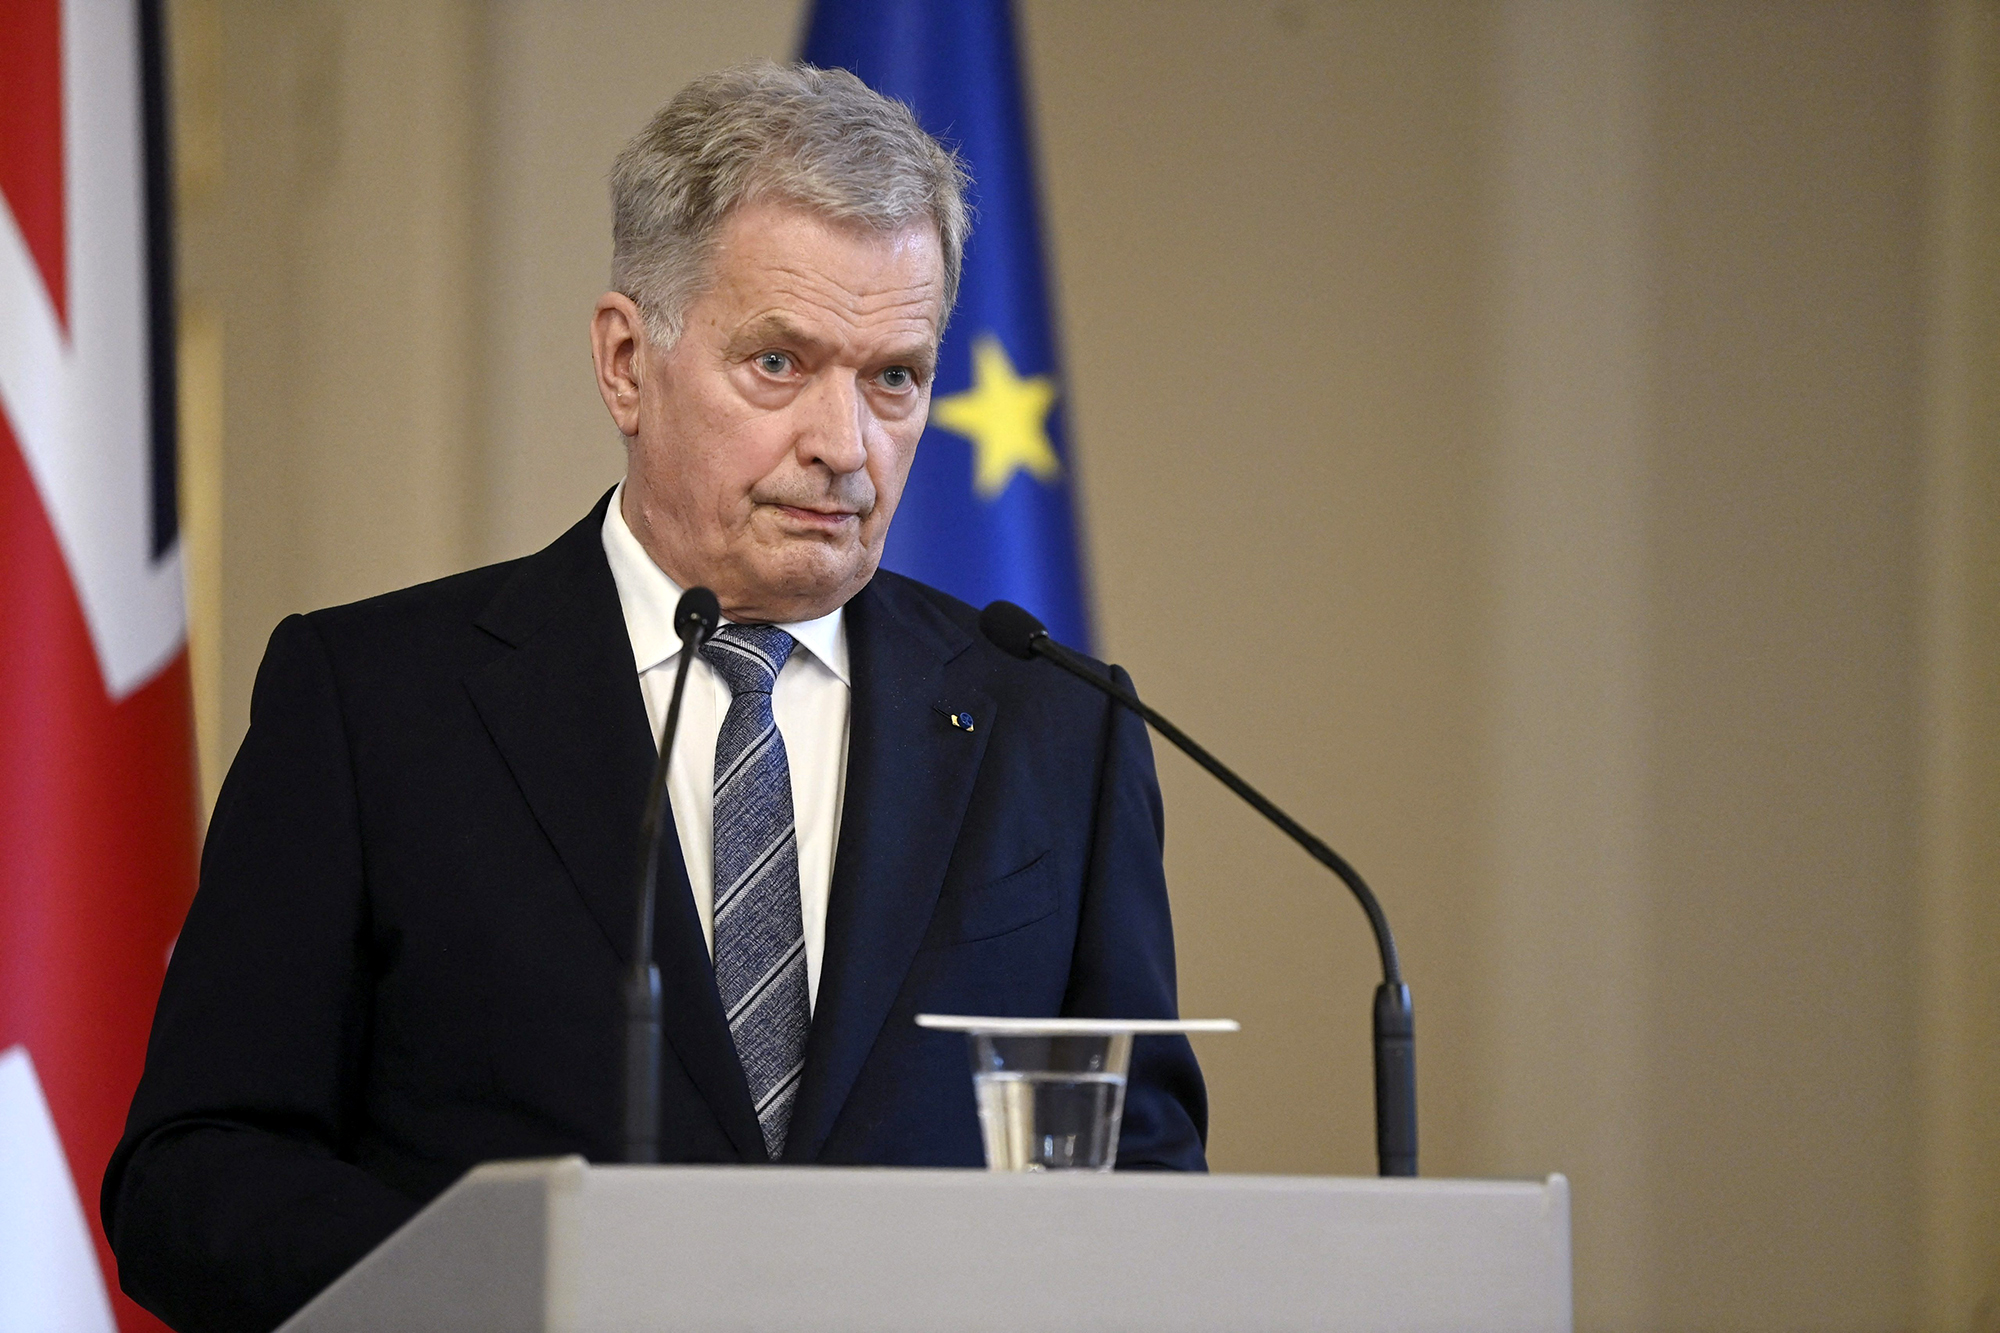 Finland's President Sauli Niinistö speaks at a press conference in Helsinki, Finland, on May 11. 